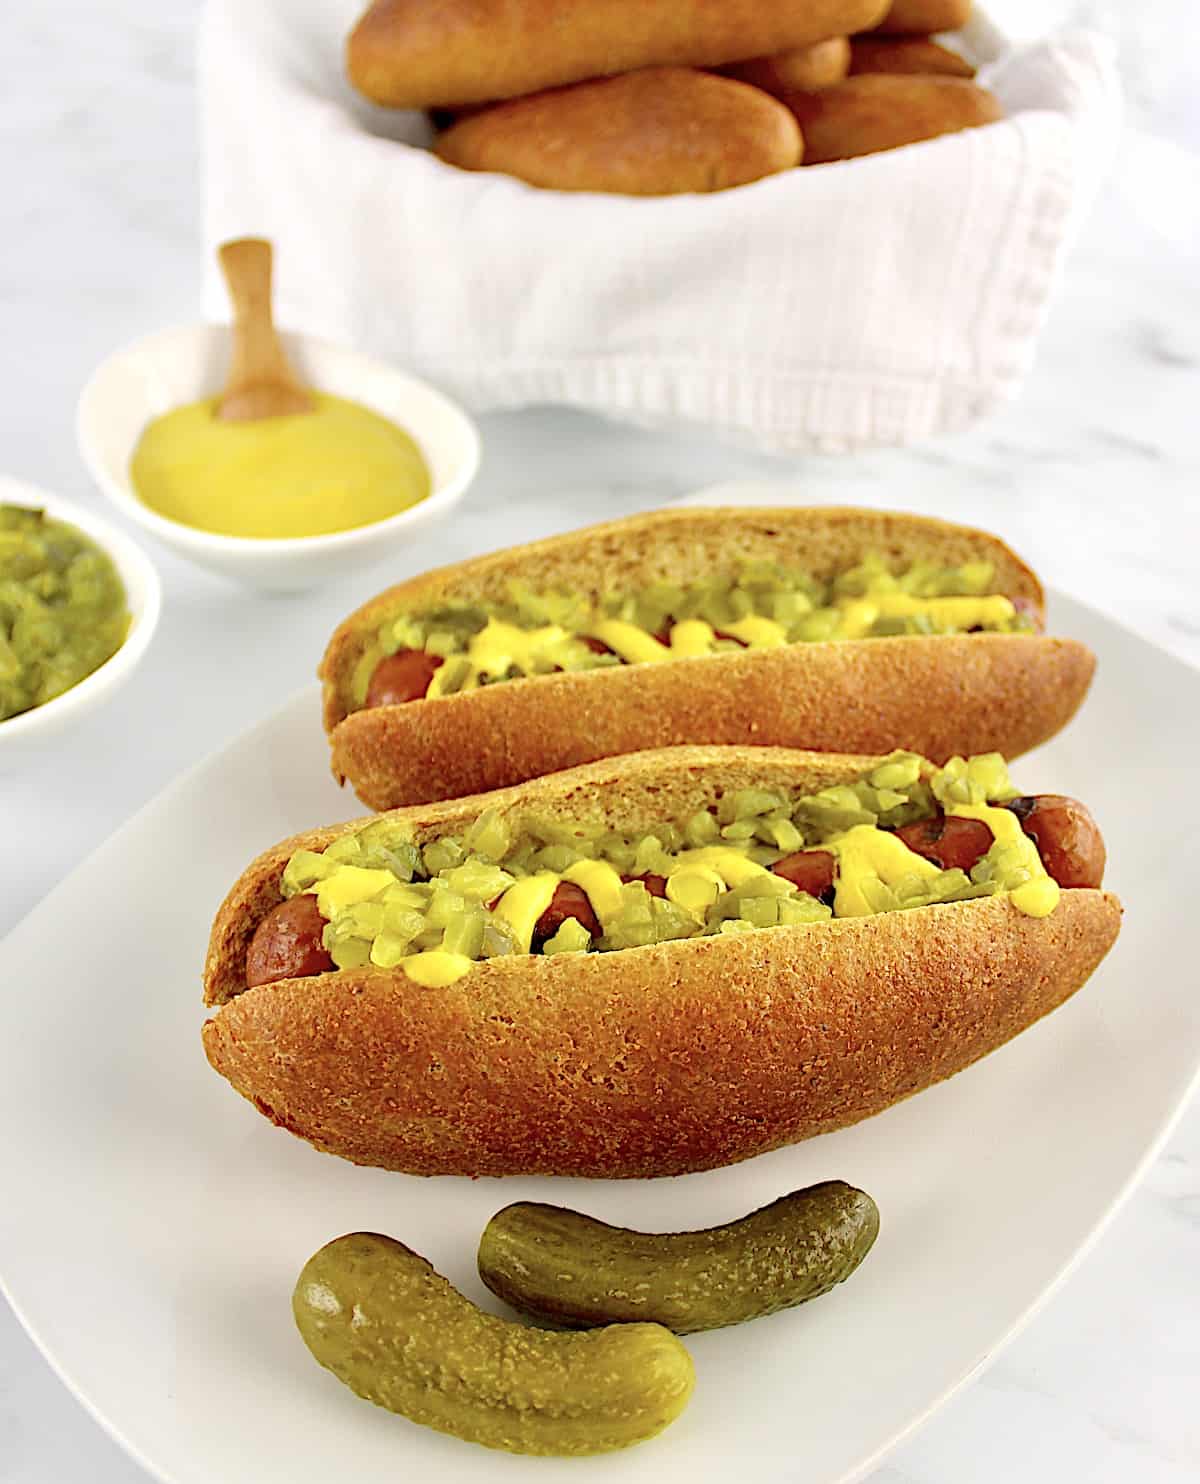 2 Keto Hot Dog Buns with hot dogs, mustard and relish with 2 pickles on side